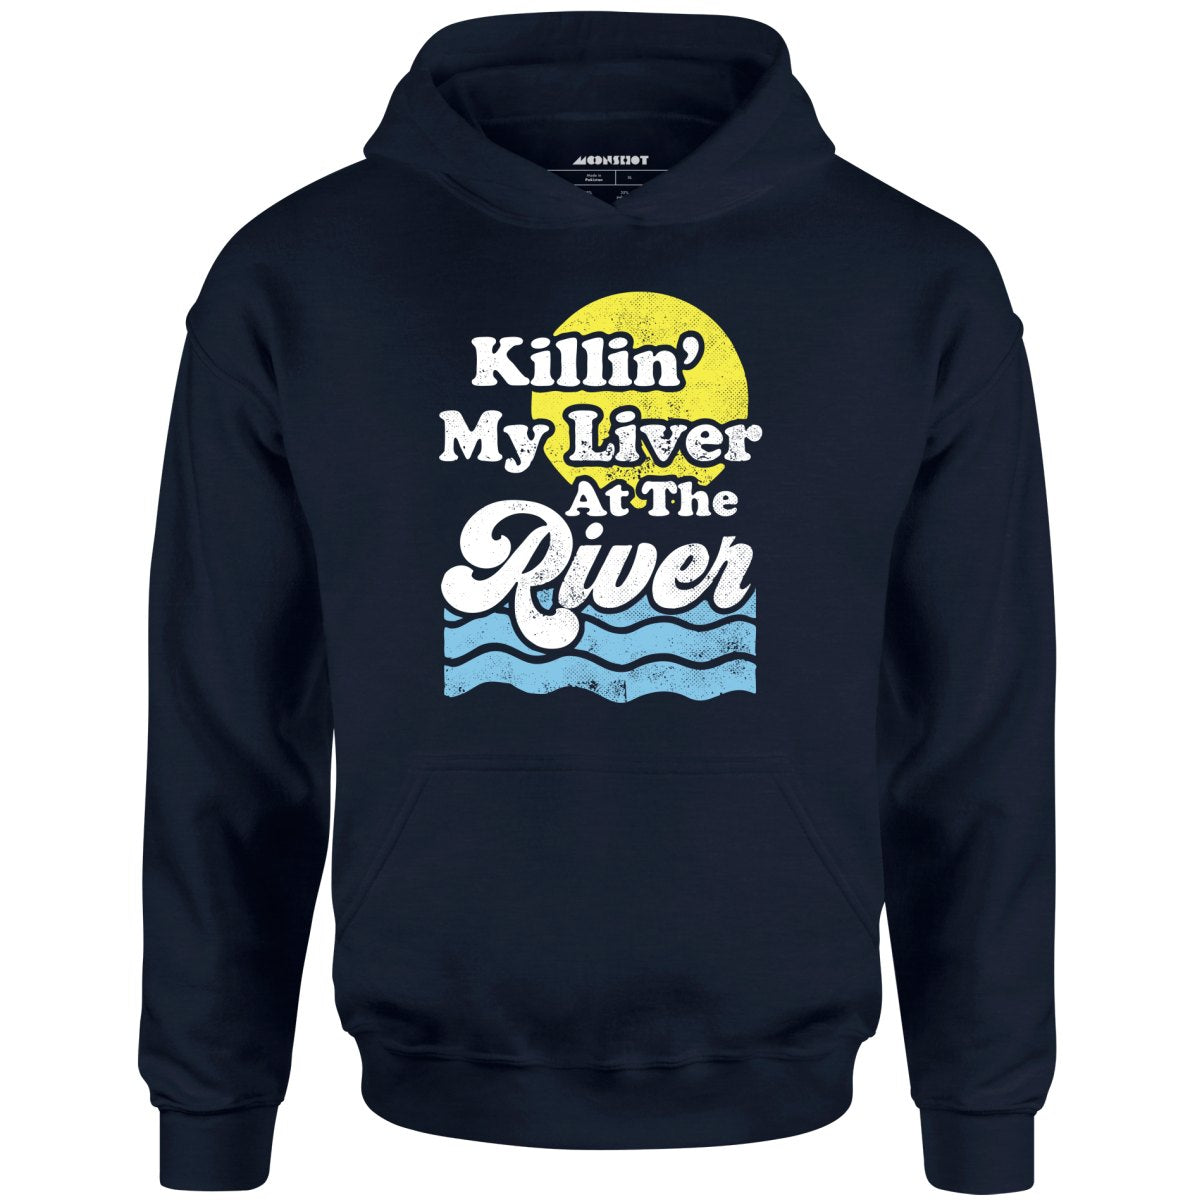 Killin' My Liver At The River - Unisex Hoodie